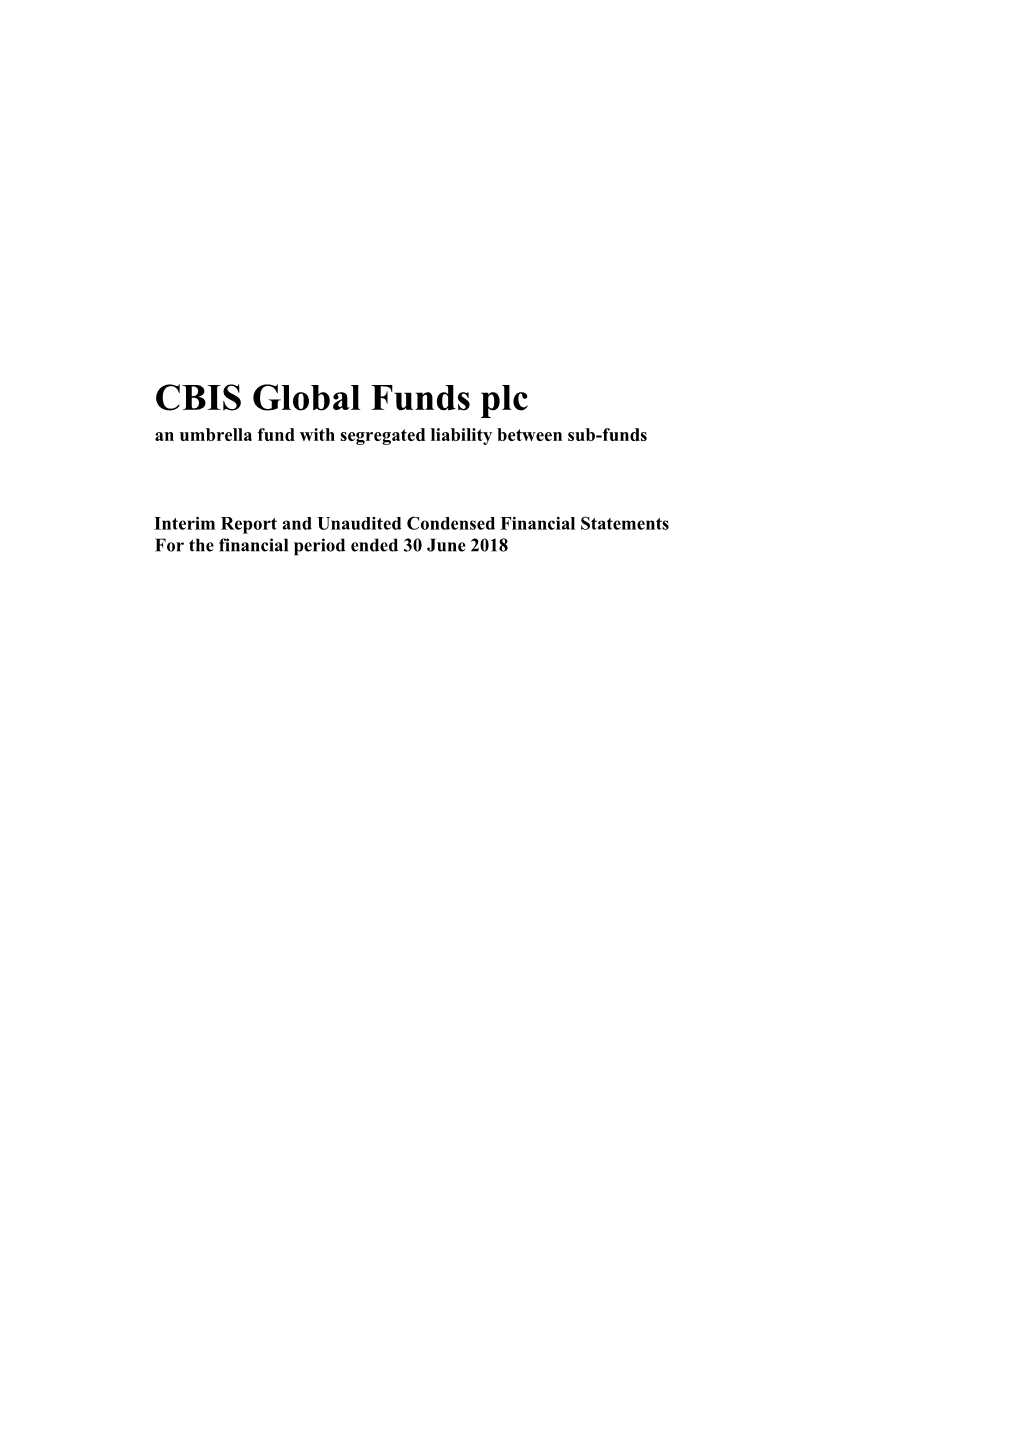 CBIS Global Funds Plc an Umbrella Fund with Segregated Liability Between Sub-Funds